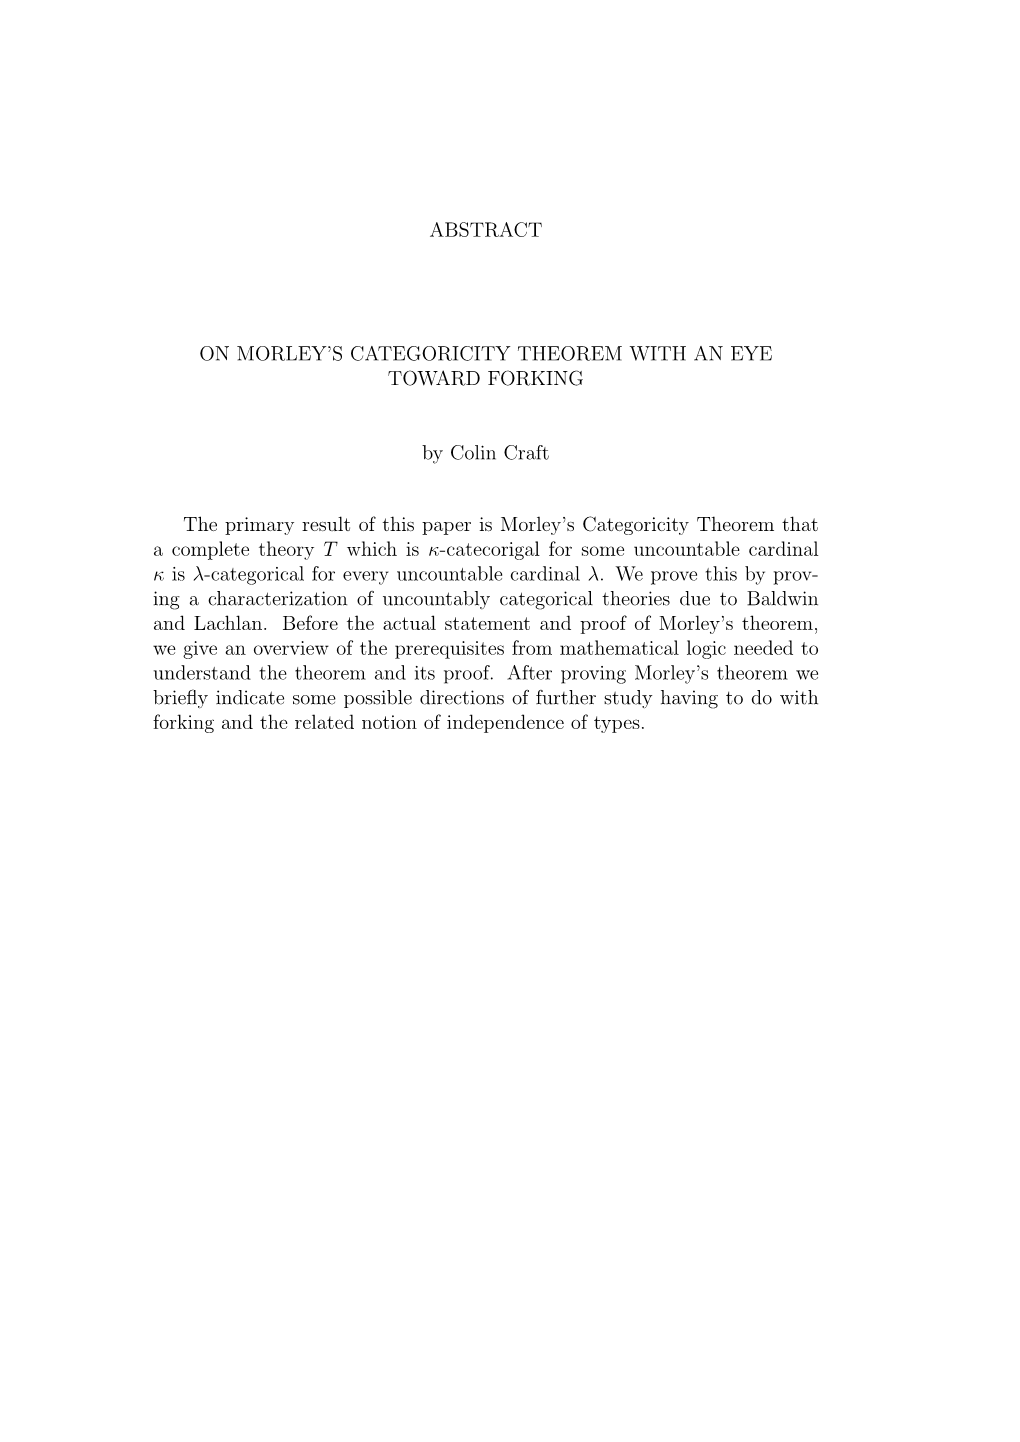 Abstract on Morley's Categoricity Theorem With